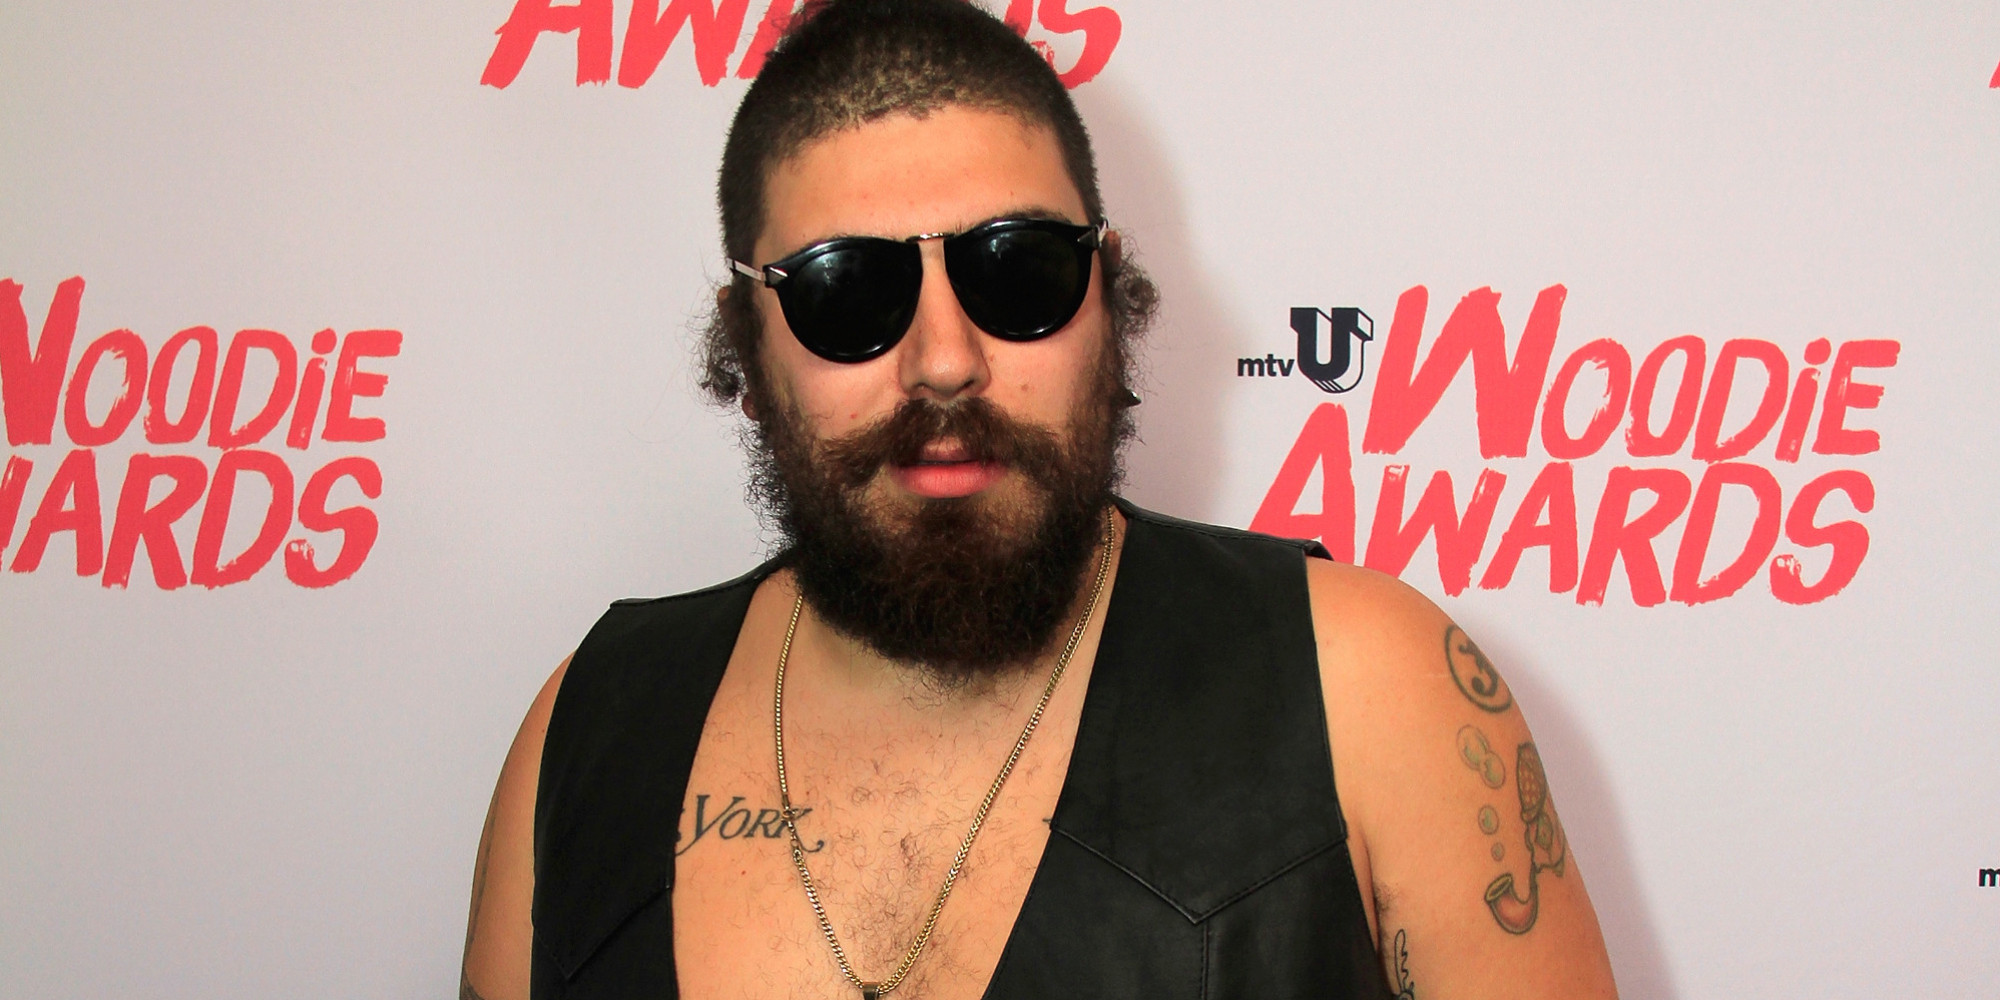 The Fat Jew Instagram Star Lands Modelling Contract Good News For Plus